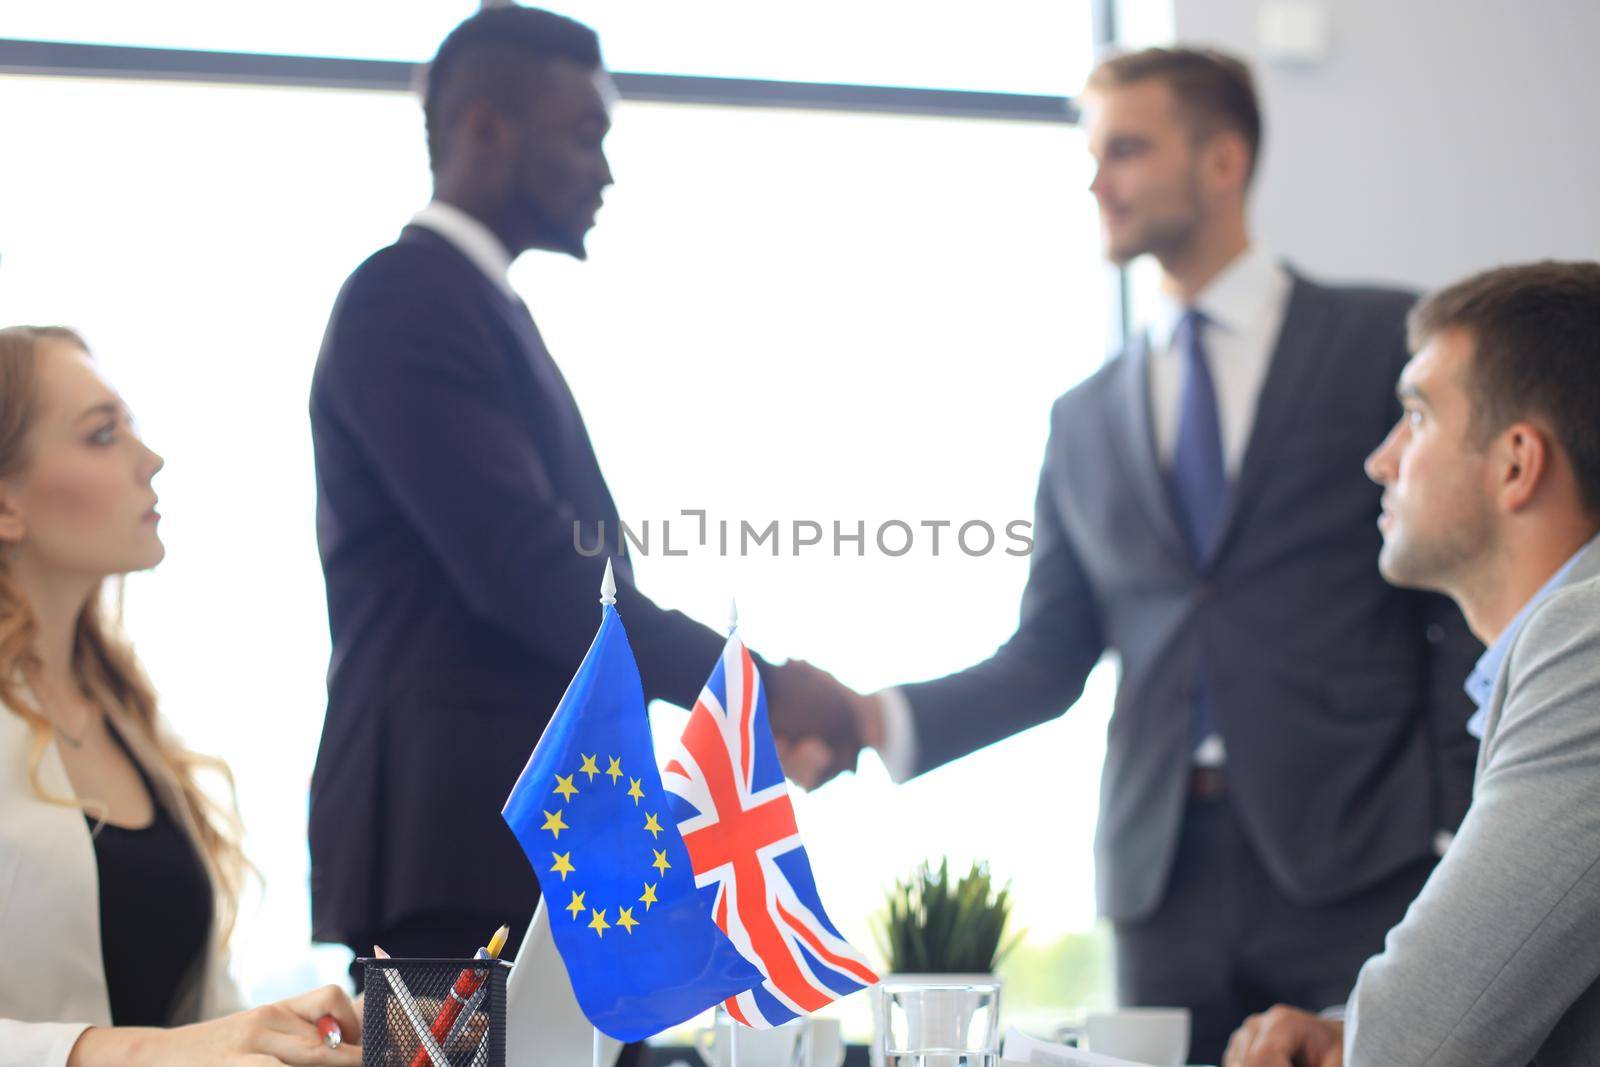 European Union and United Kingdom leaders shaking hands on a deal agreement. Brexit